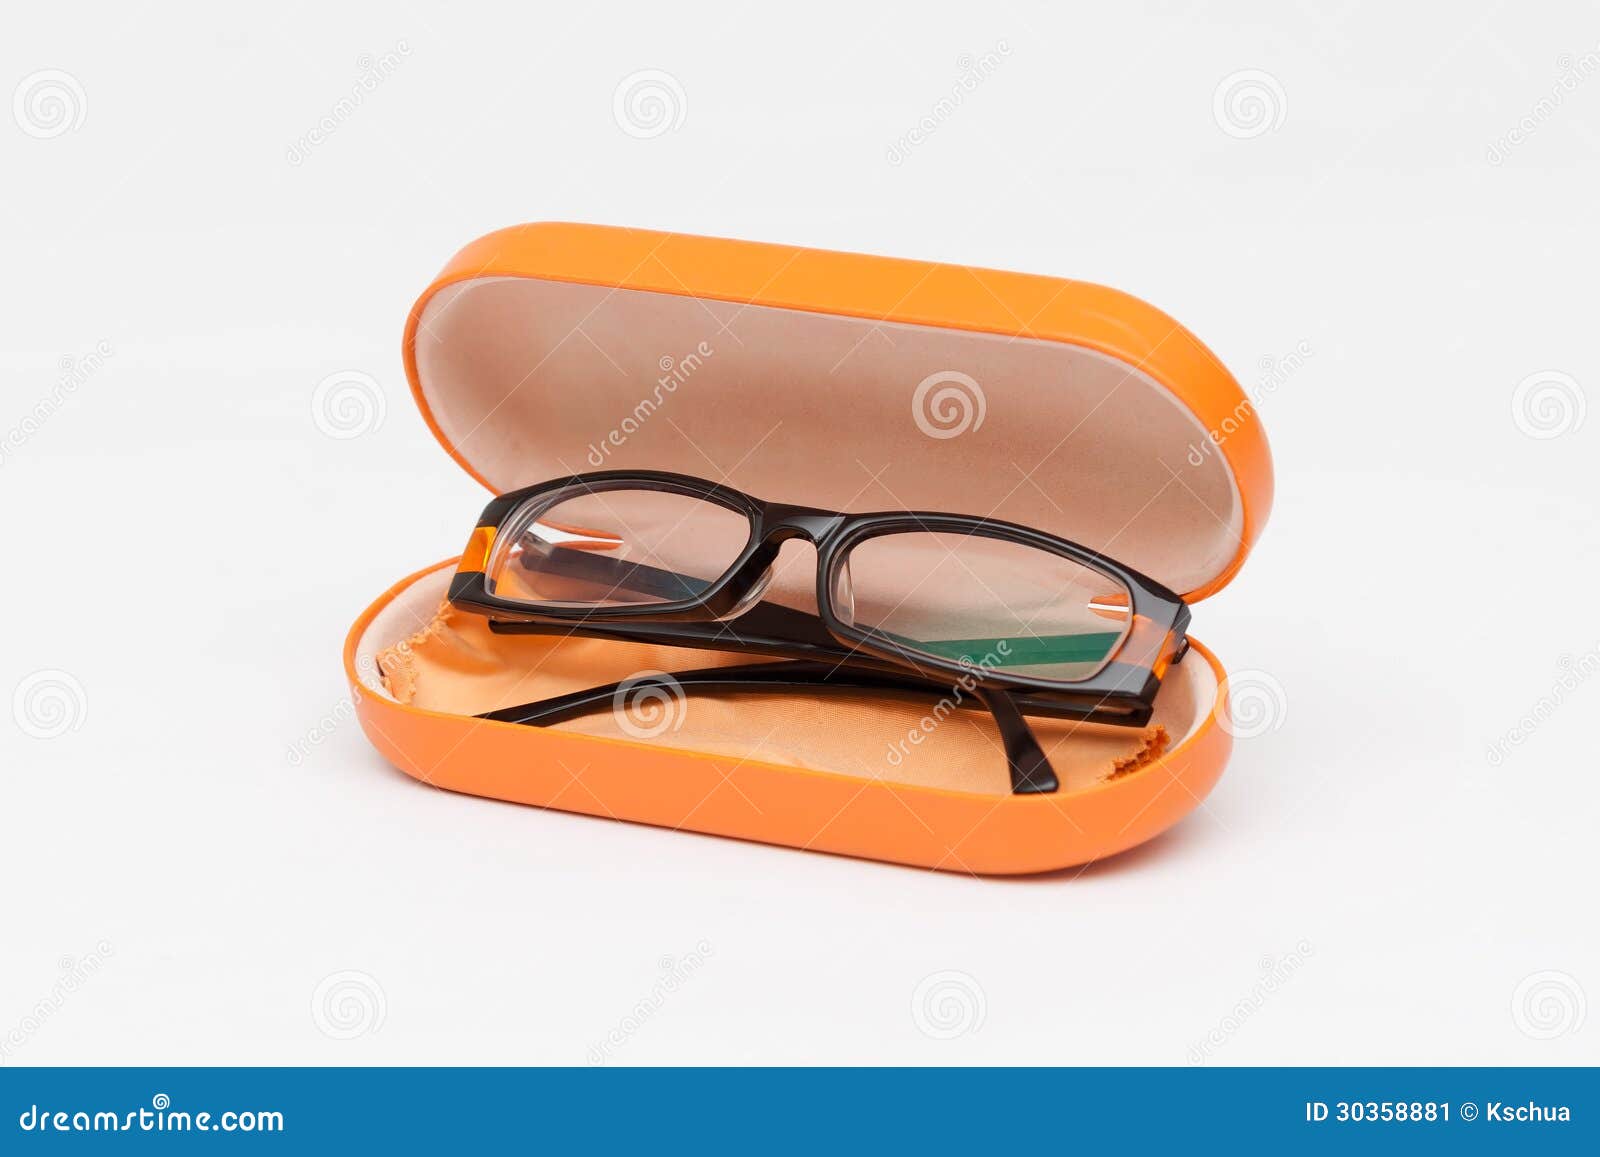 spectacle case with eye glasses